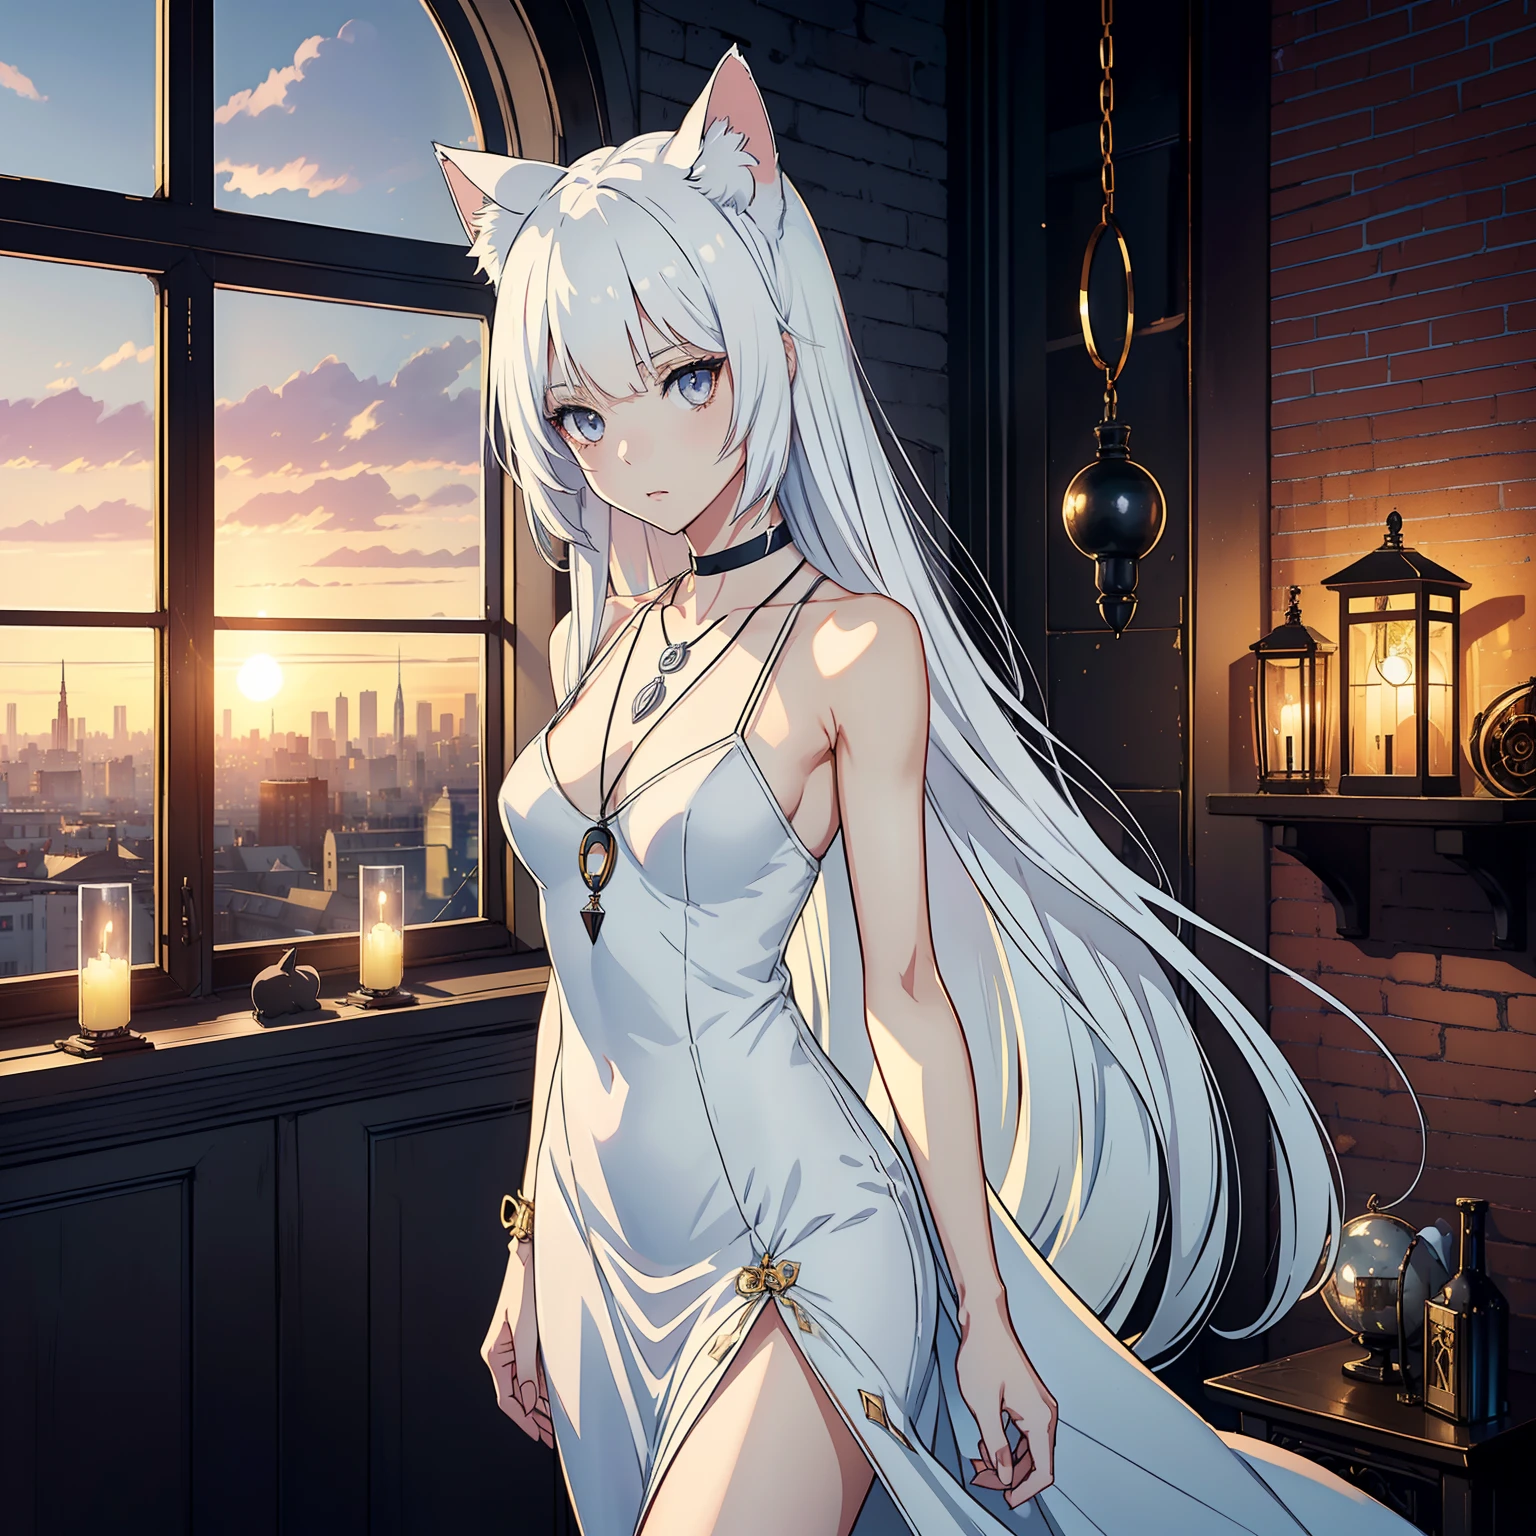 (skinny body, elegant posture), (best quality, 4k, 8k, high-res, masterpiece, ultra-detailed, anime style), (1 girl, solo, cat ears, long bob, white hair, gray eyes, catgirl, looking at viewer), (pendant, erring, white long dress), (city loft behind), sunset, panoramic windows loft, warm ambience